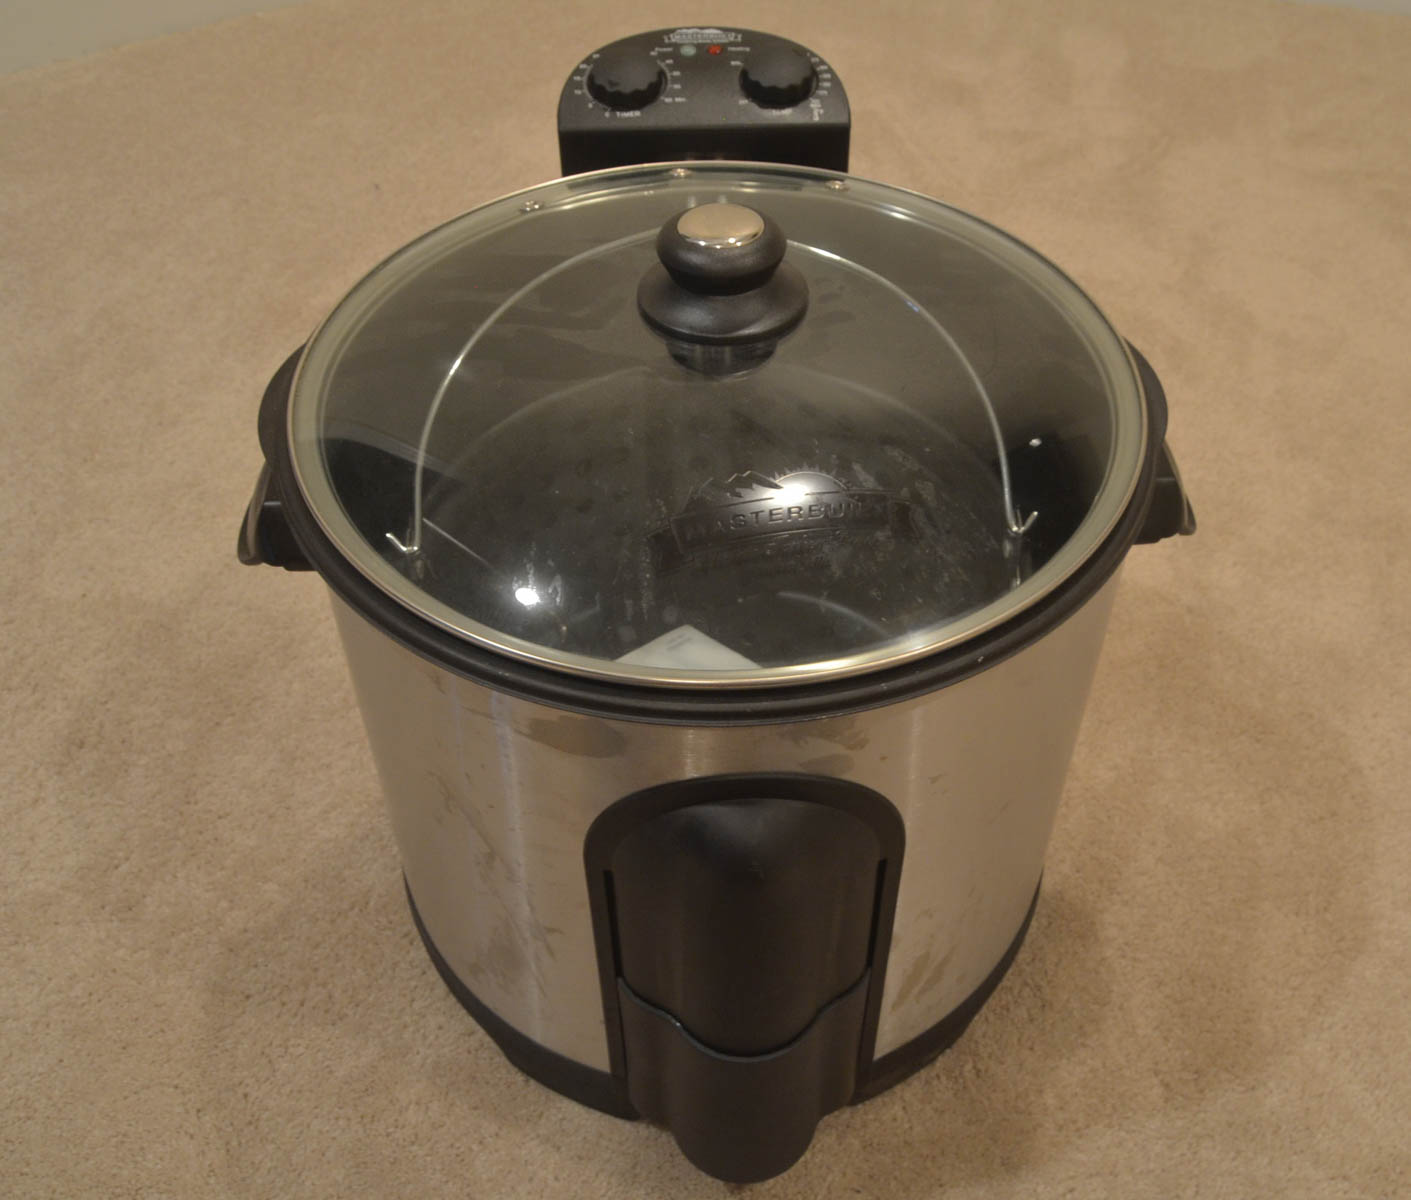 masterbuilt electric turkey fryer and seafood kettle